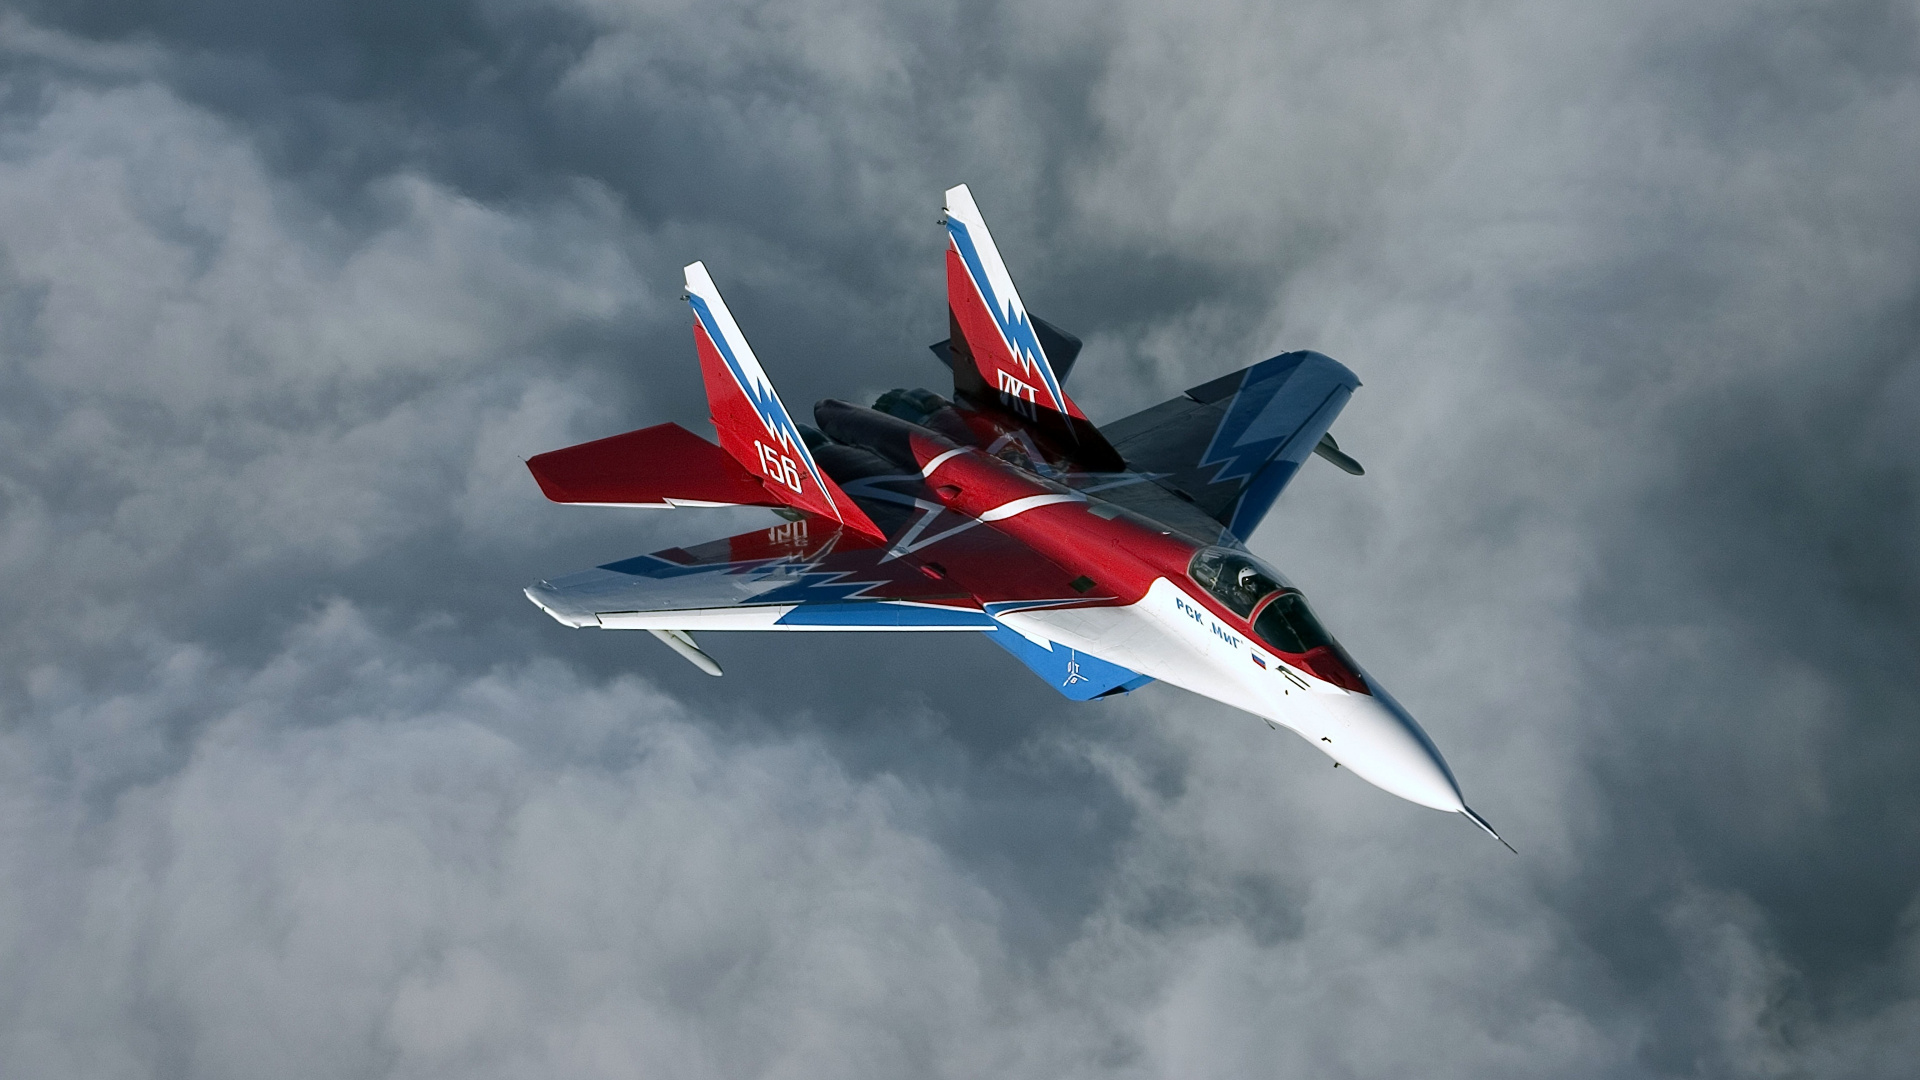 Red and White Jet Plane in Mid Air. Wallpaper in 1920x1080 Resolution